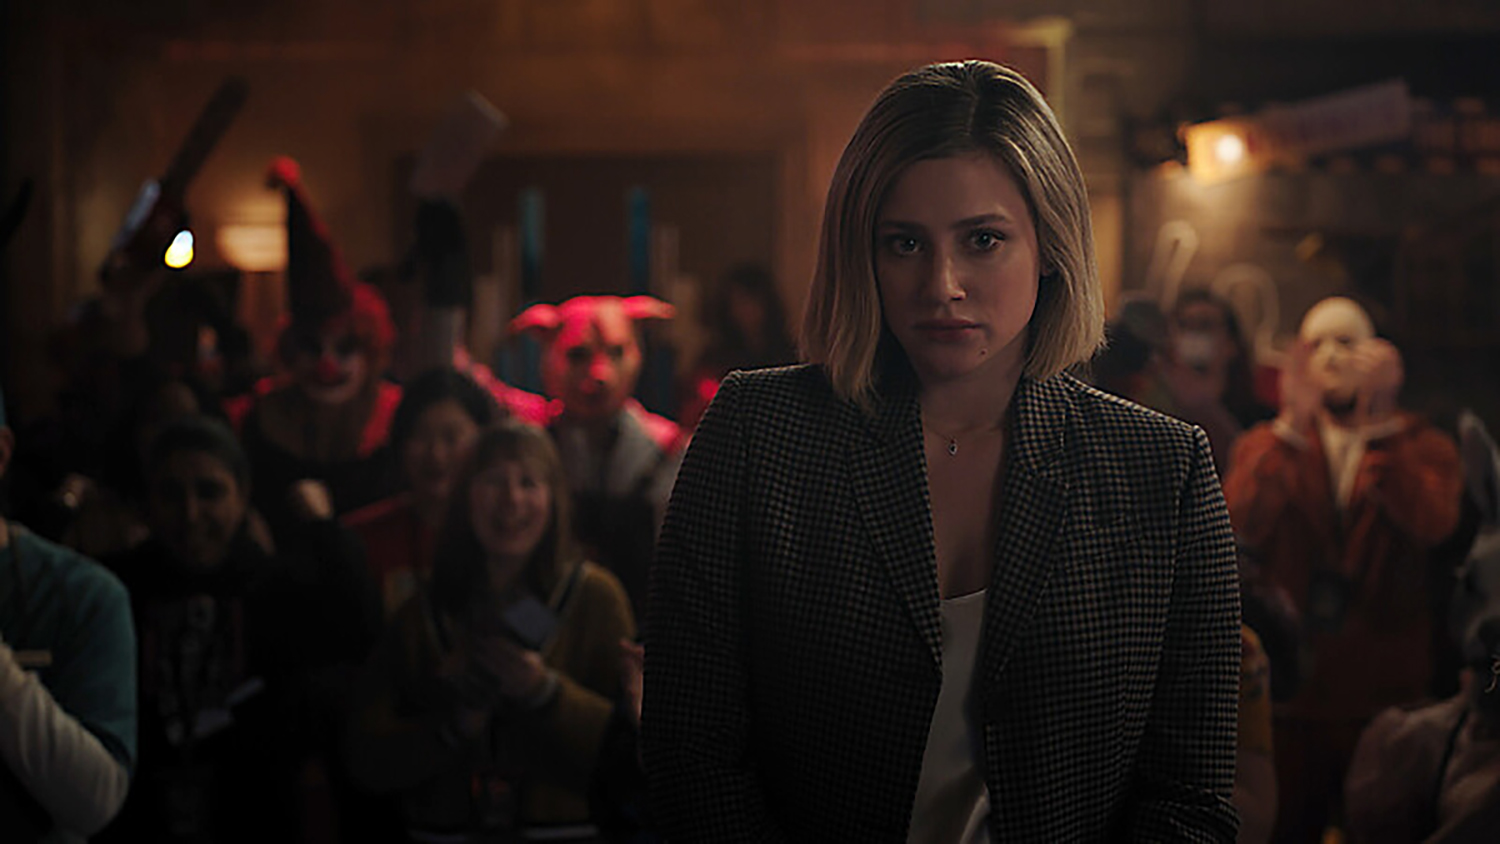 Lili Reinhart as Betty Cooper in Riverdale Season 6, in which TBK's identity is revealed.